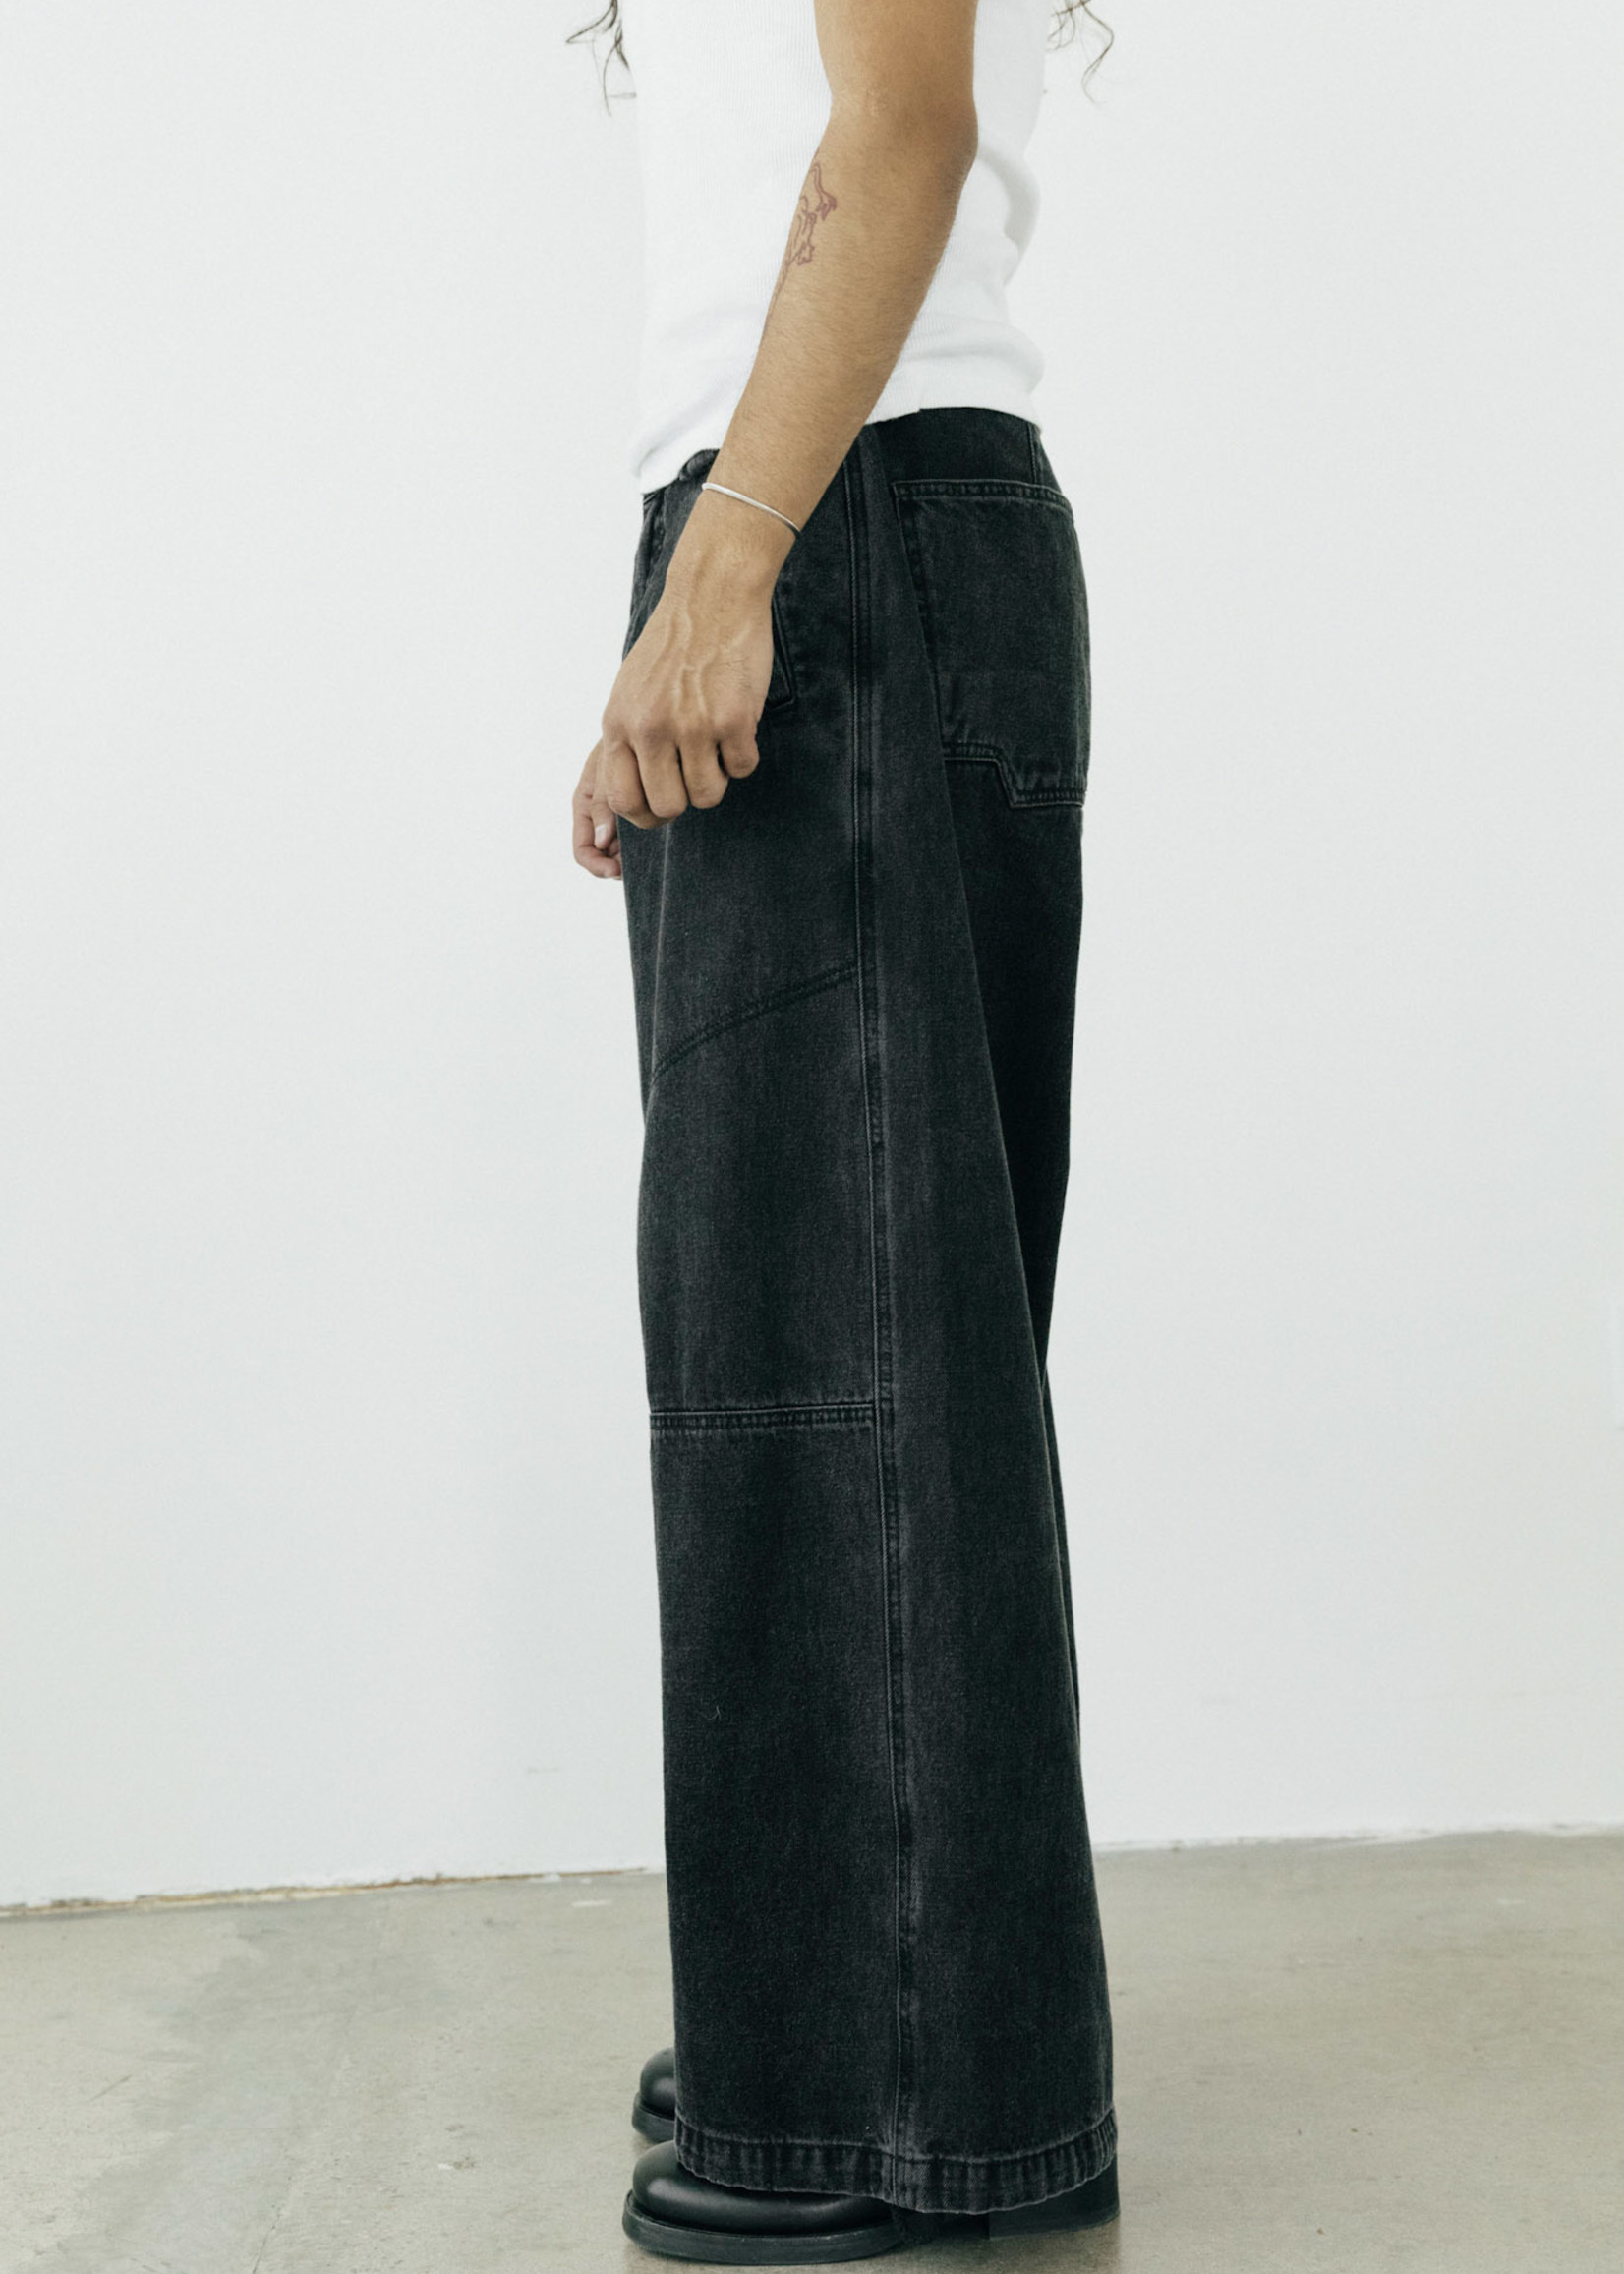 WILLY CHAVARRIA Raver Wide Leg Jeans in Washed Black